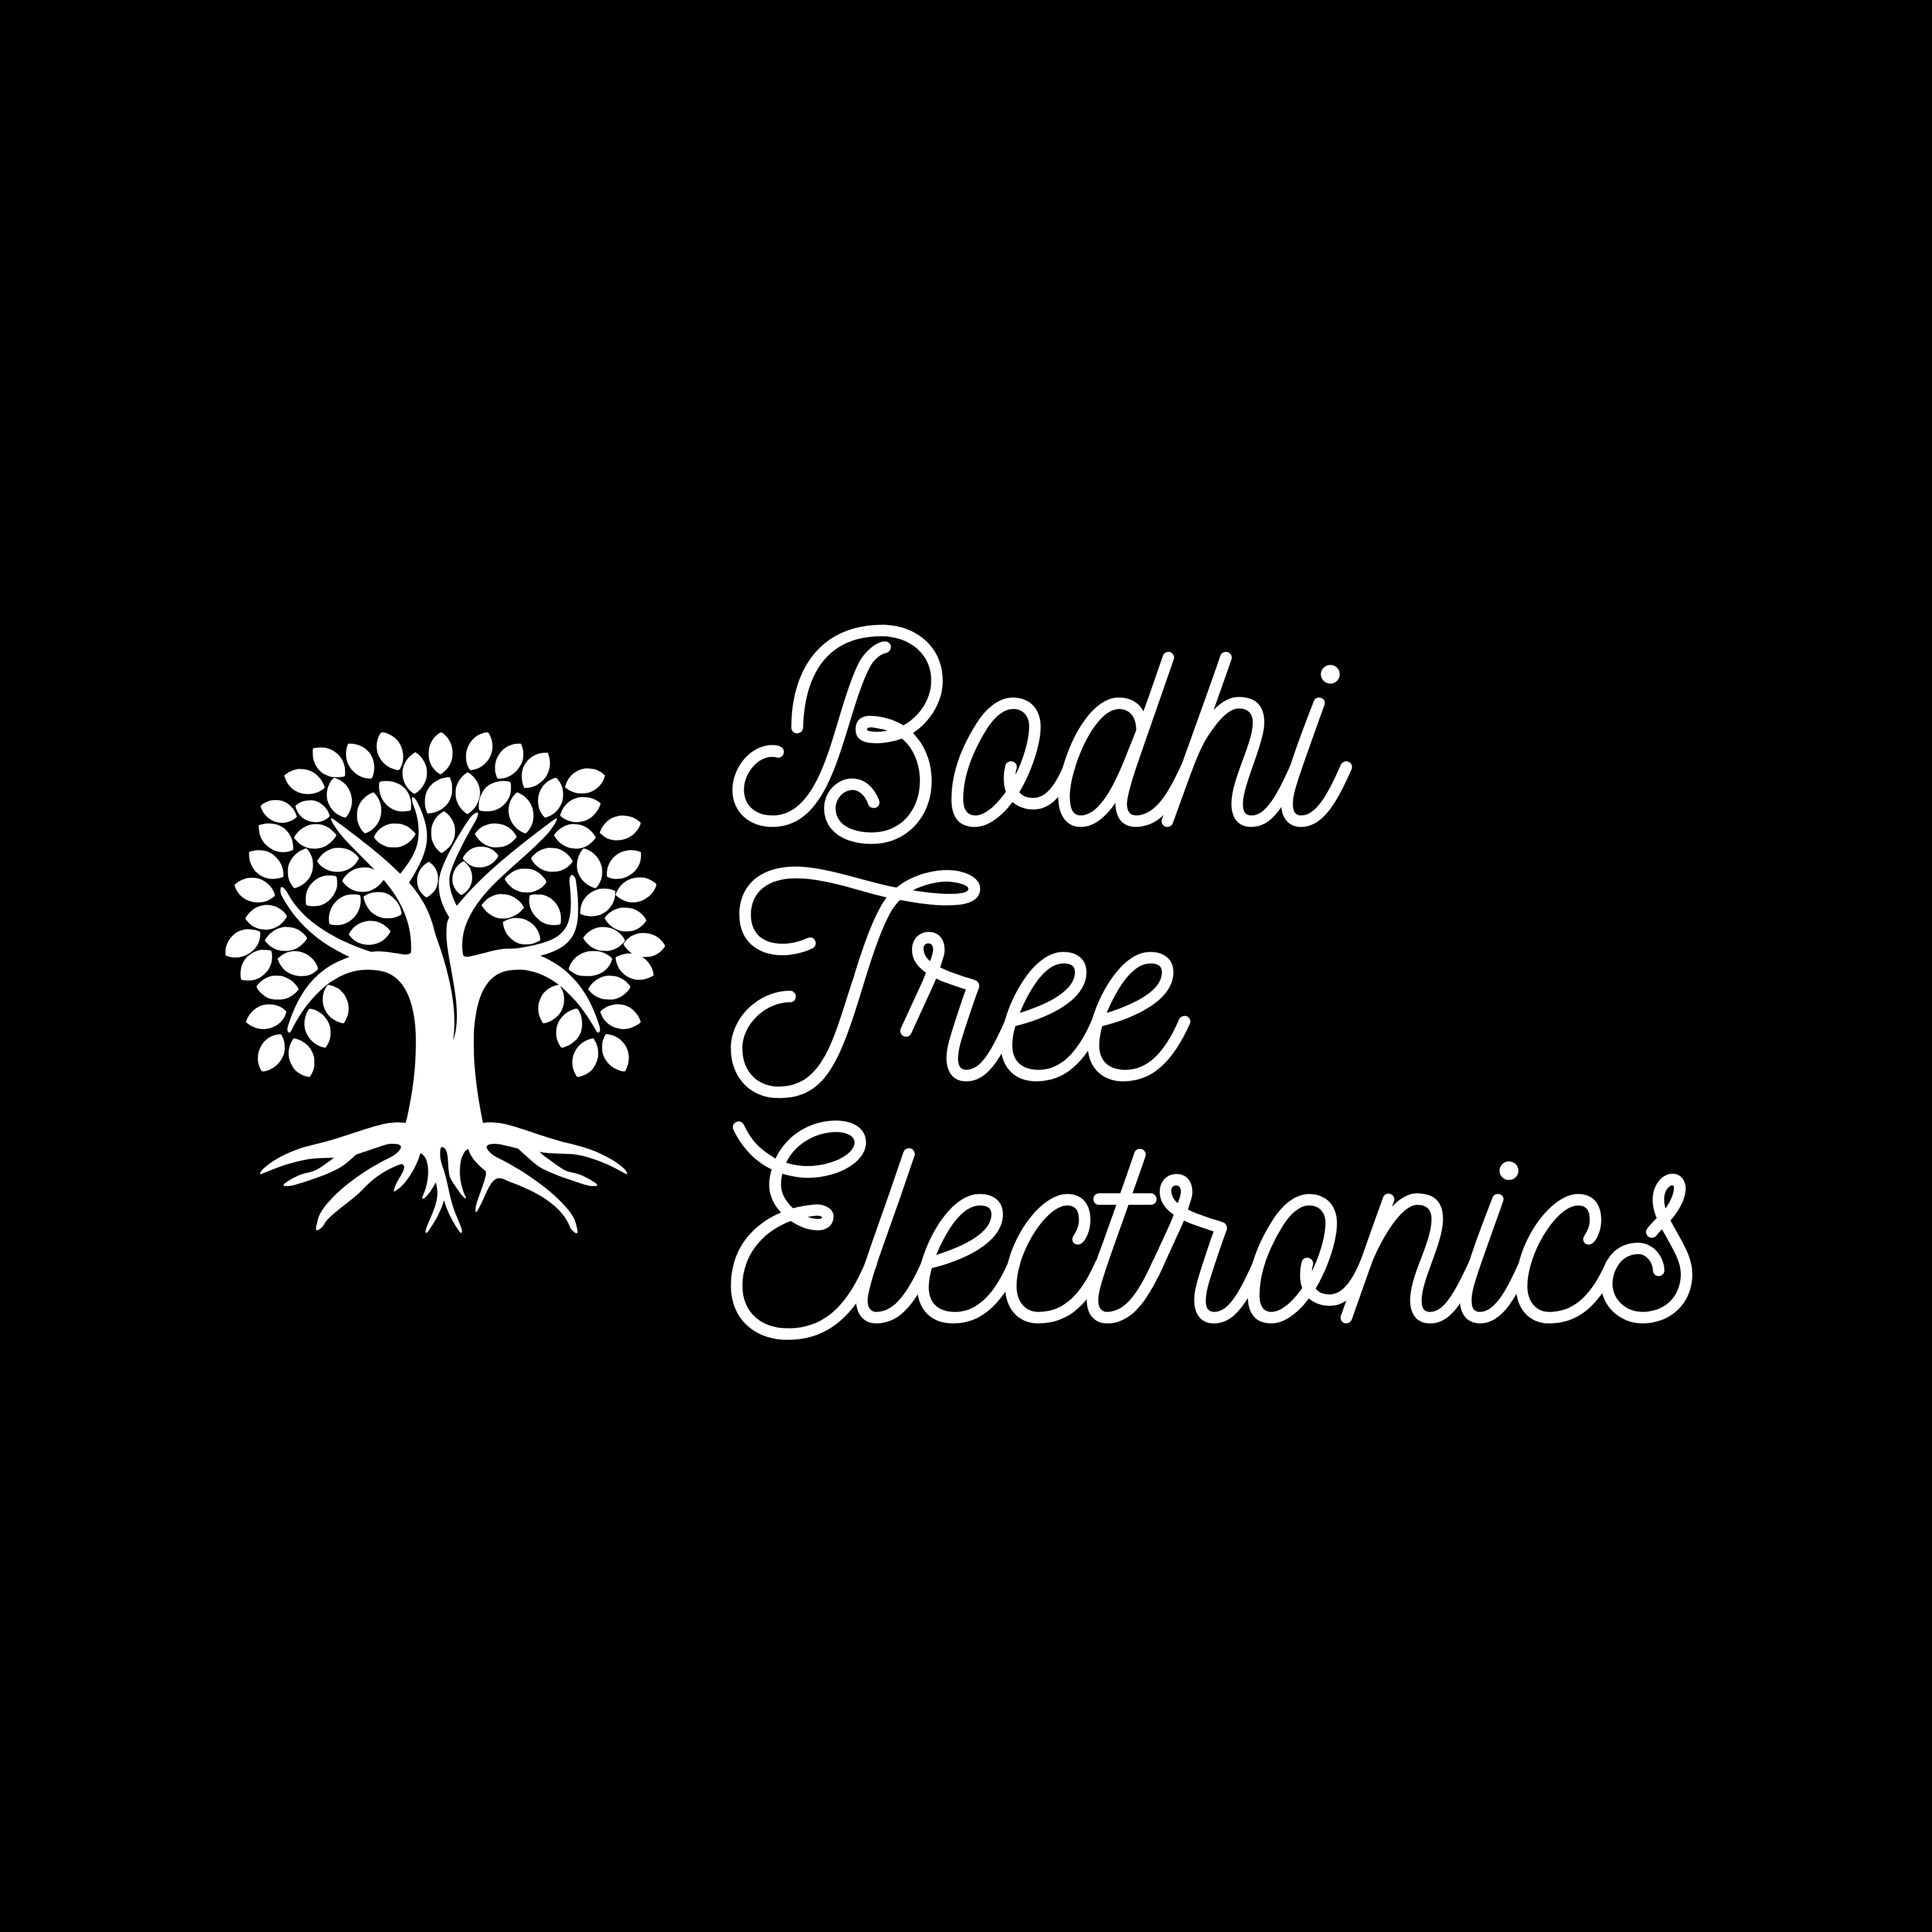 Bodhi Tree Electronics Emerges as Preferred Platform For People Looking To Spot 